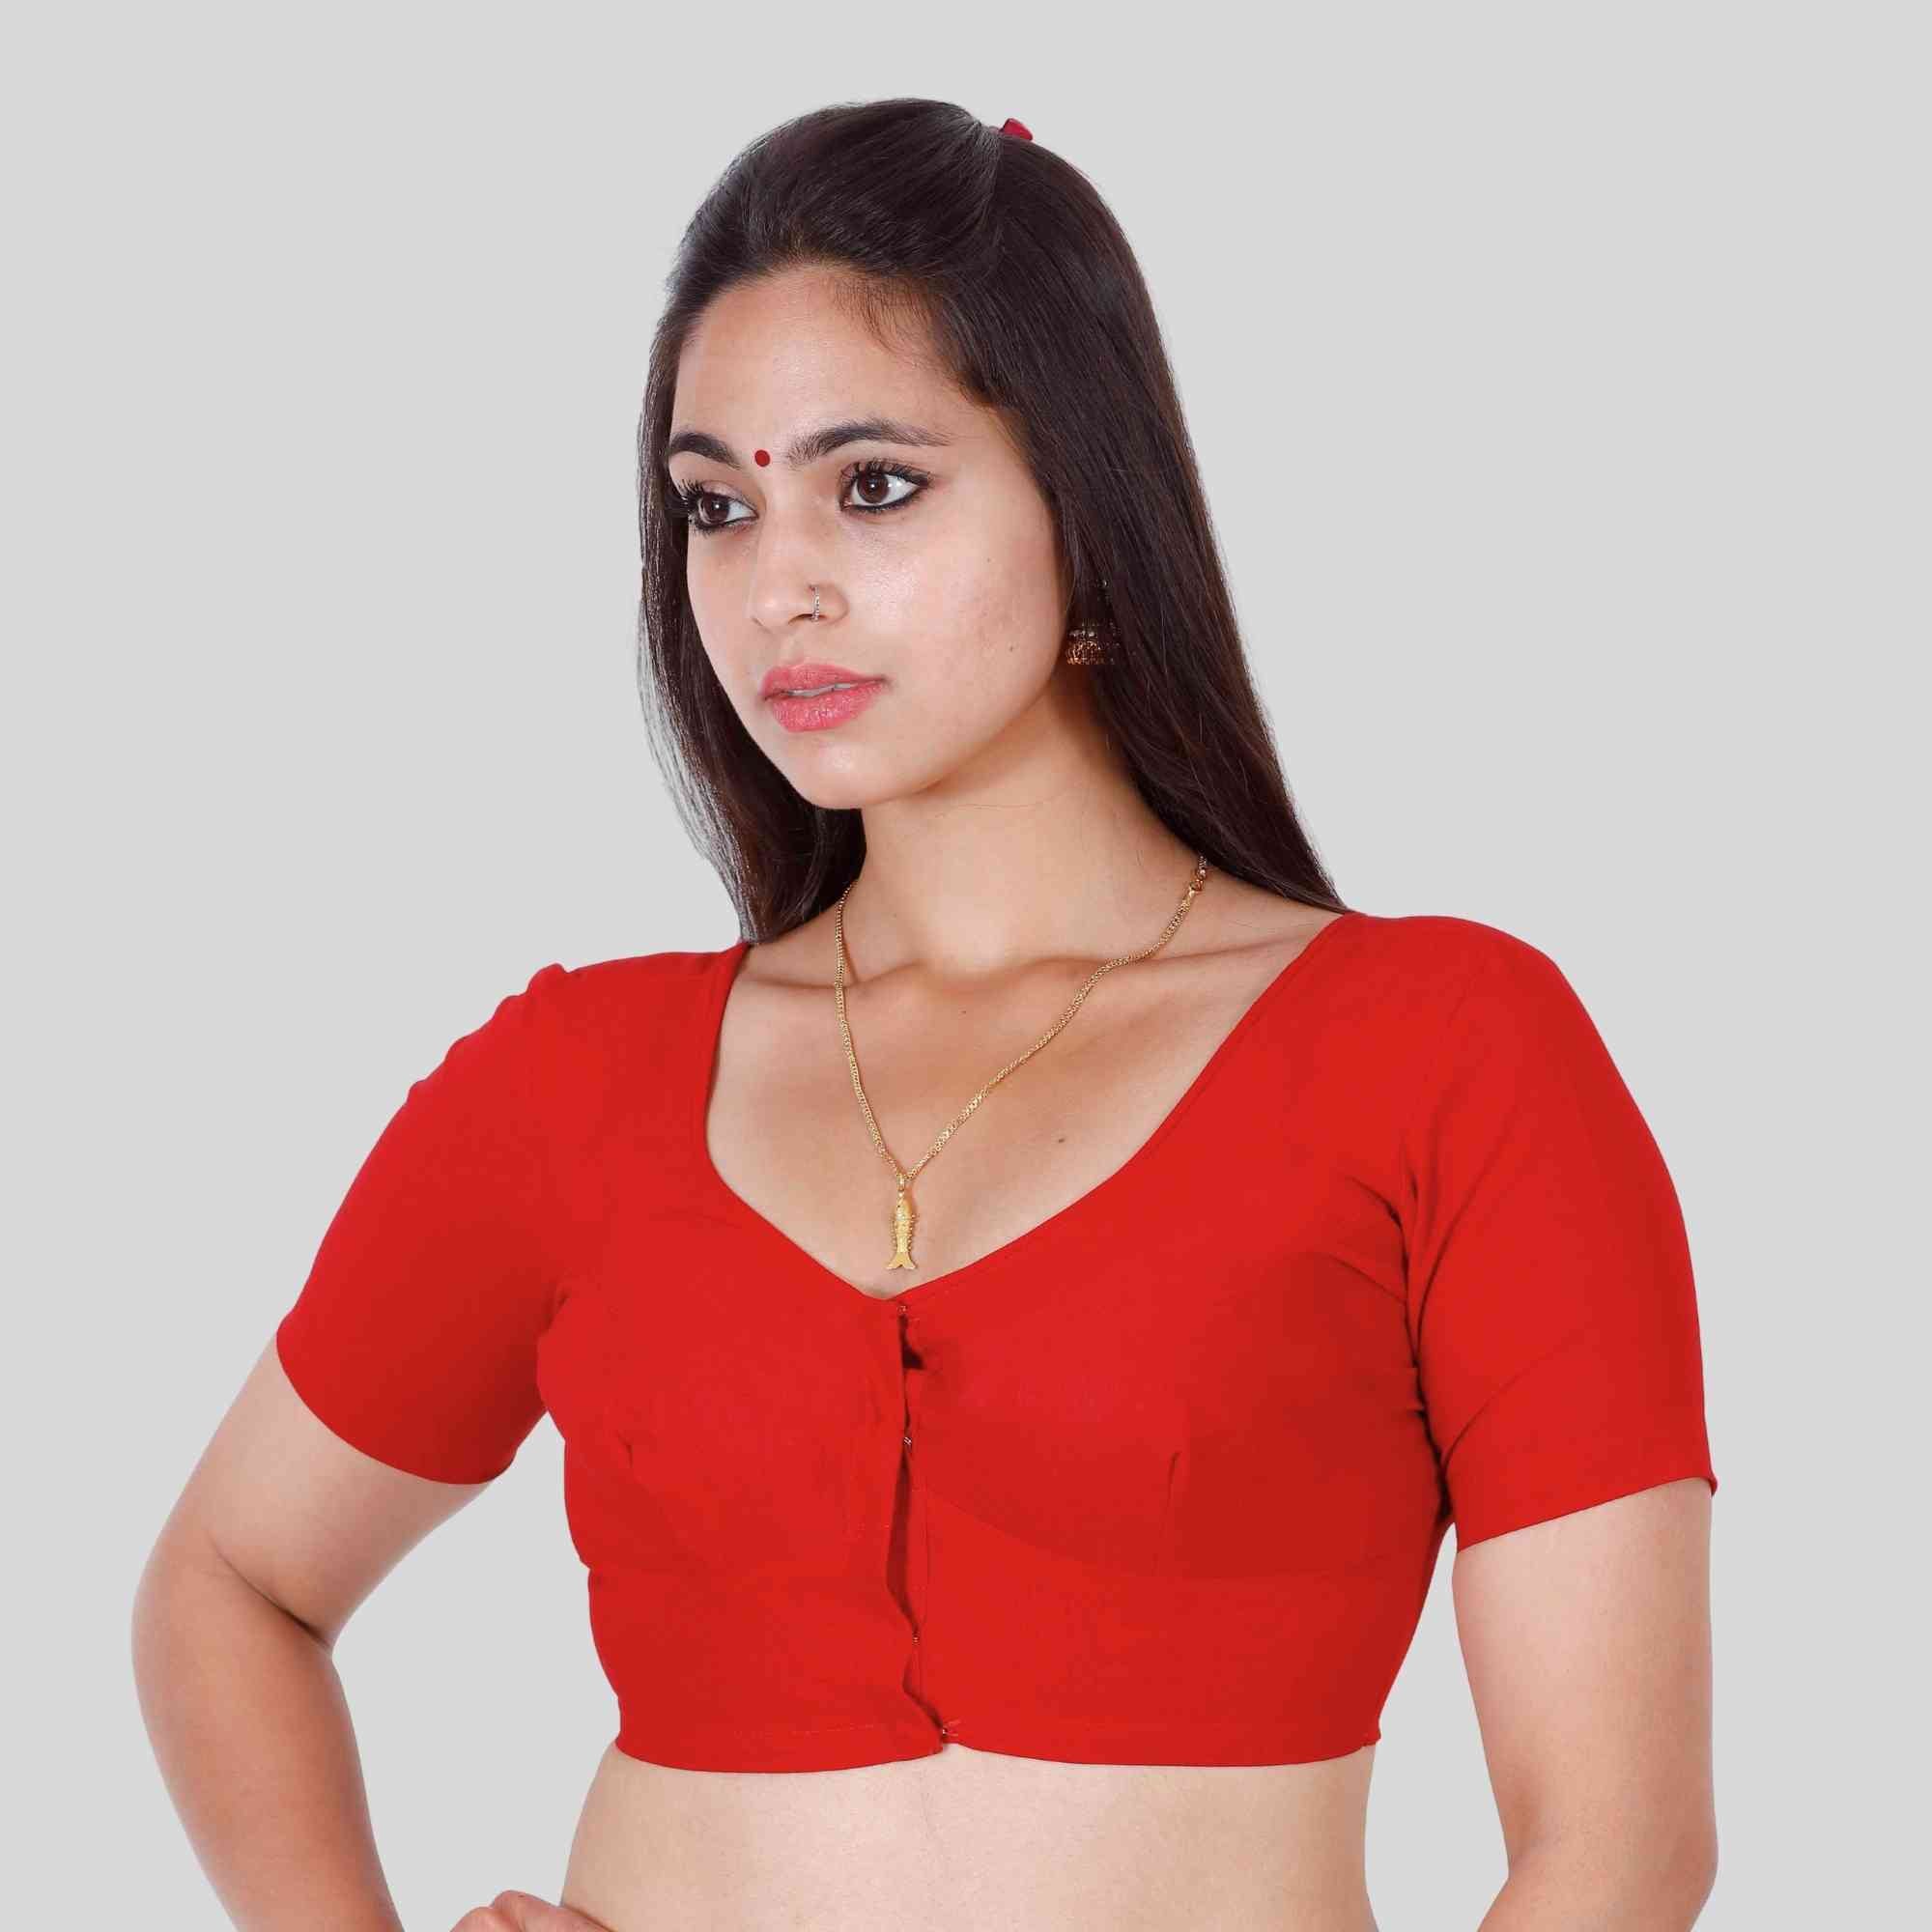 2 by 2 red blouse